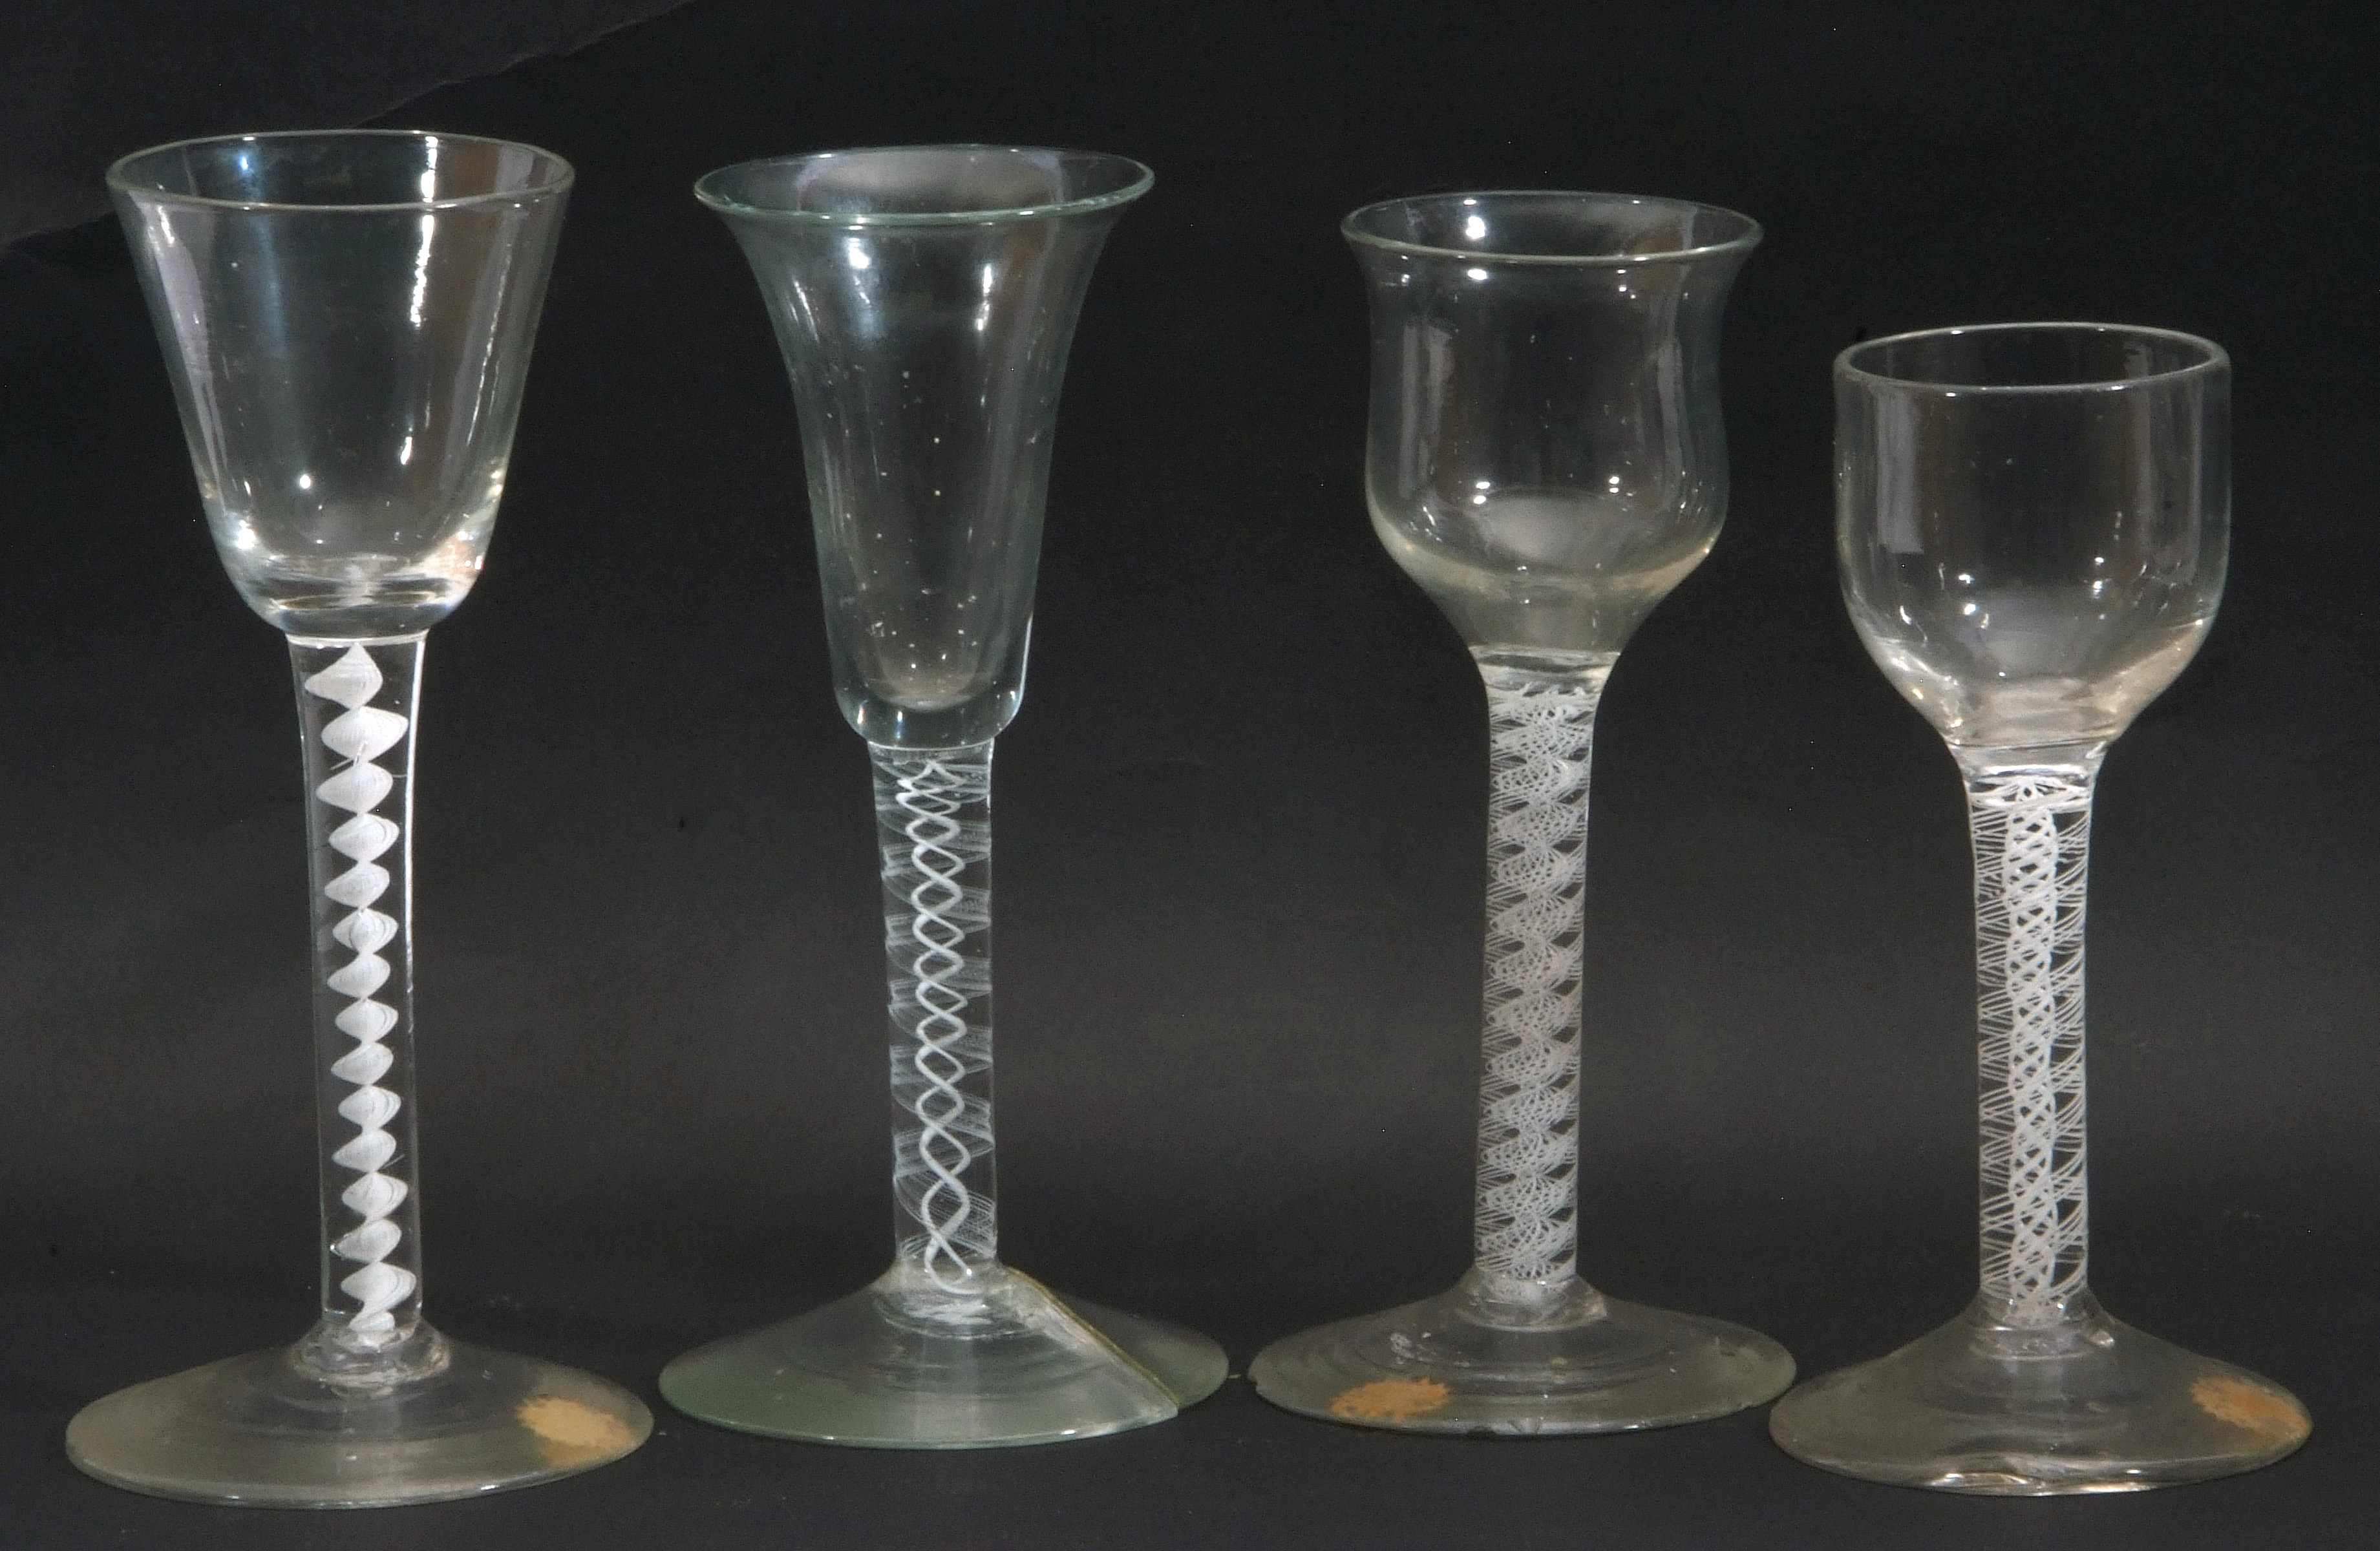 Group of 4 mid 18th century wine glasses, all with opaque/air twist stems, (4) - Image 2 of 3